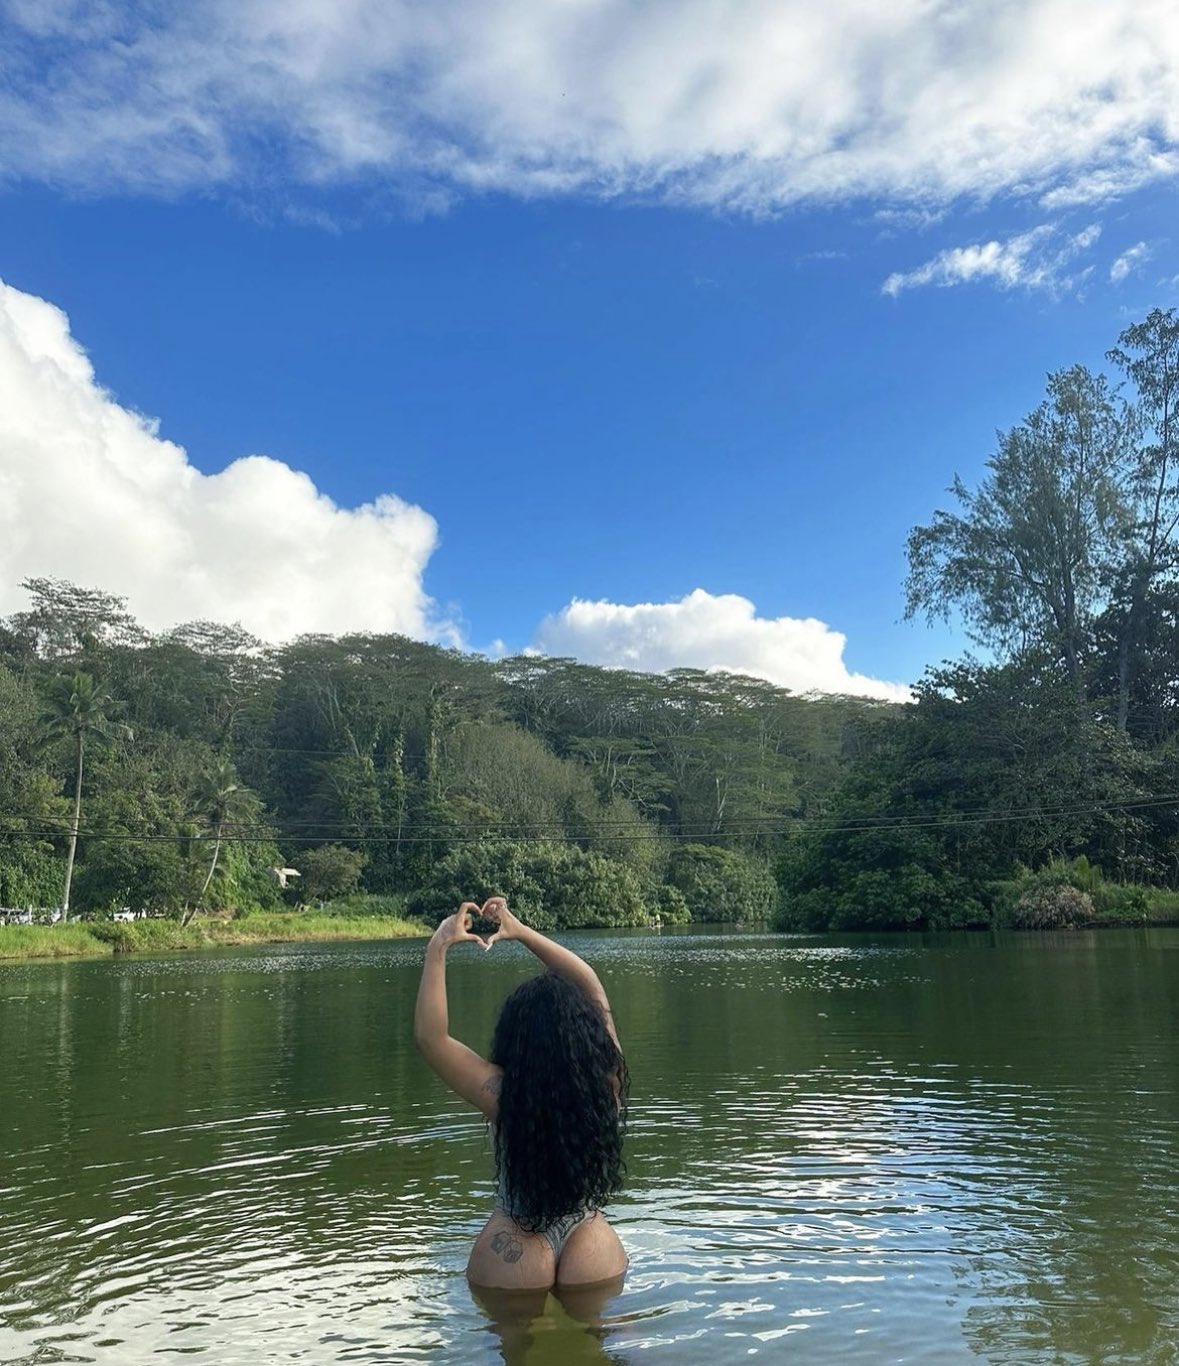 SZA enjoying her free time during her vacation in Hawaii